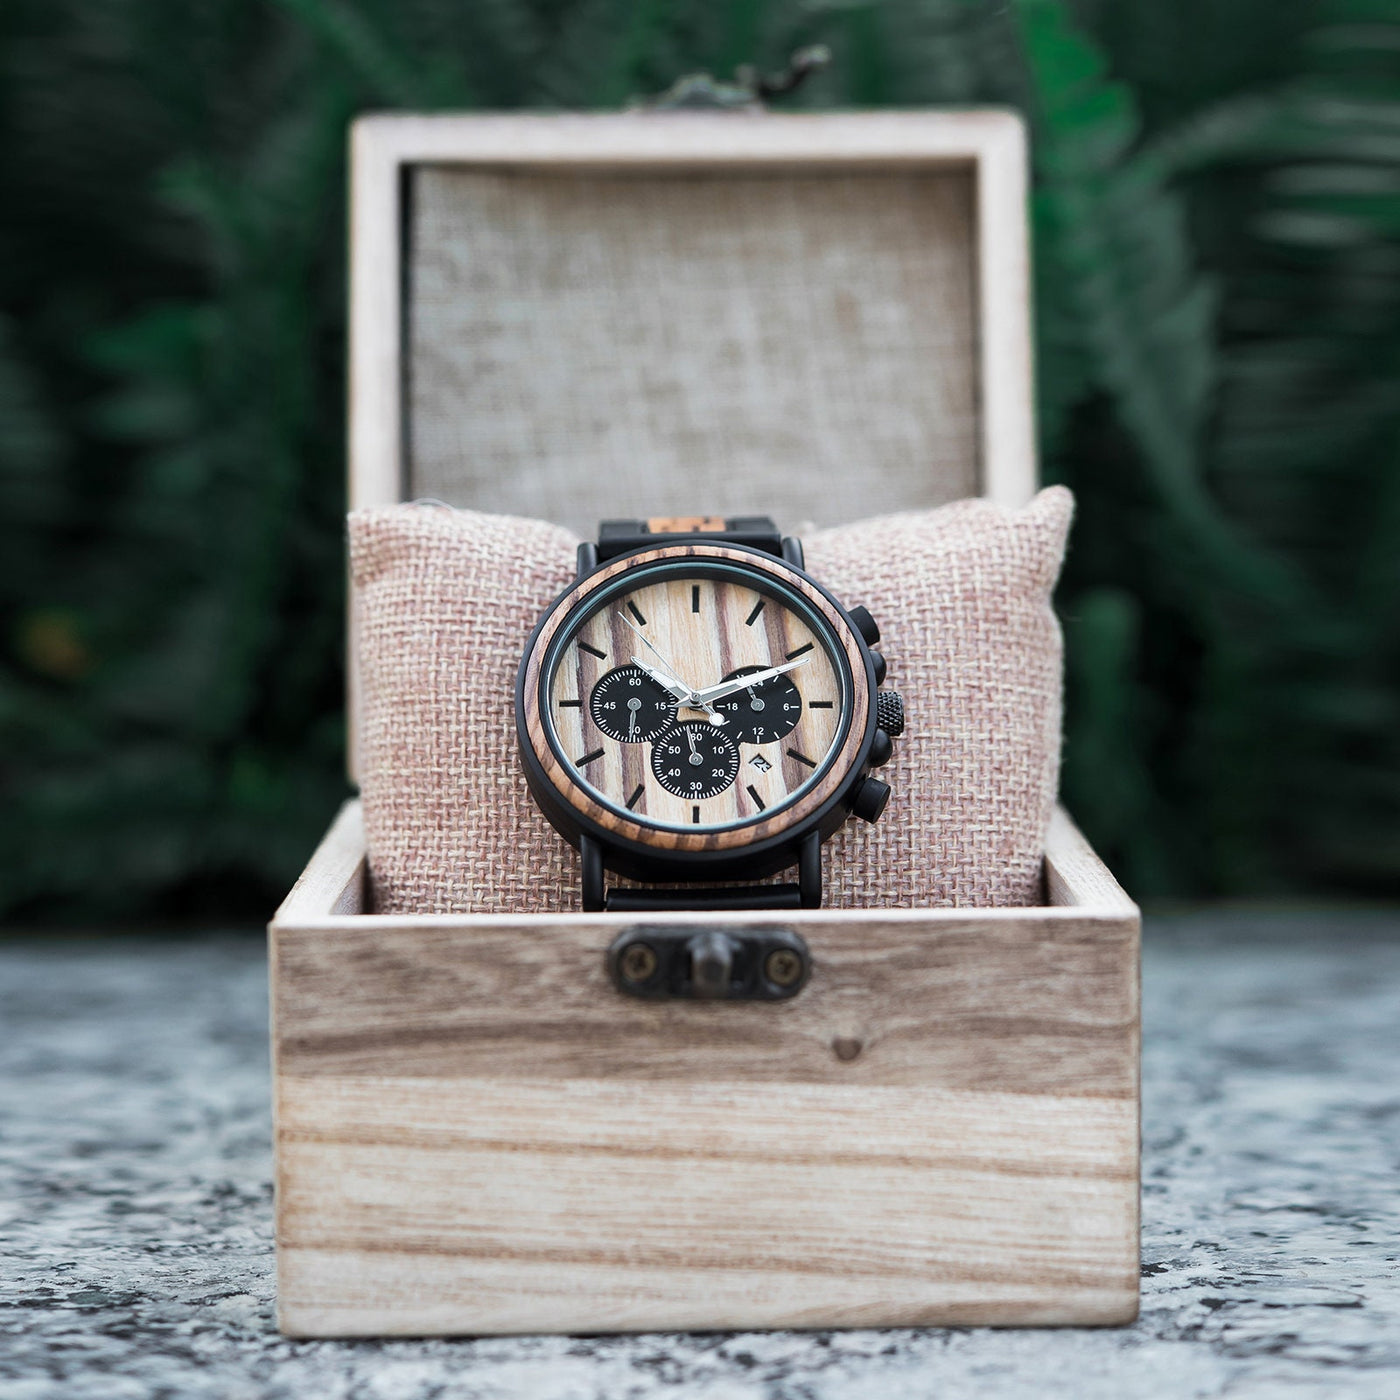 Engraved Watch, Mens Watch, Wood Watch | Watches For Men, anniversary gift for boyfriend, husband gifts, birthday present, gift for groom